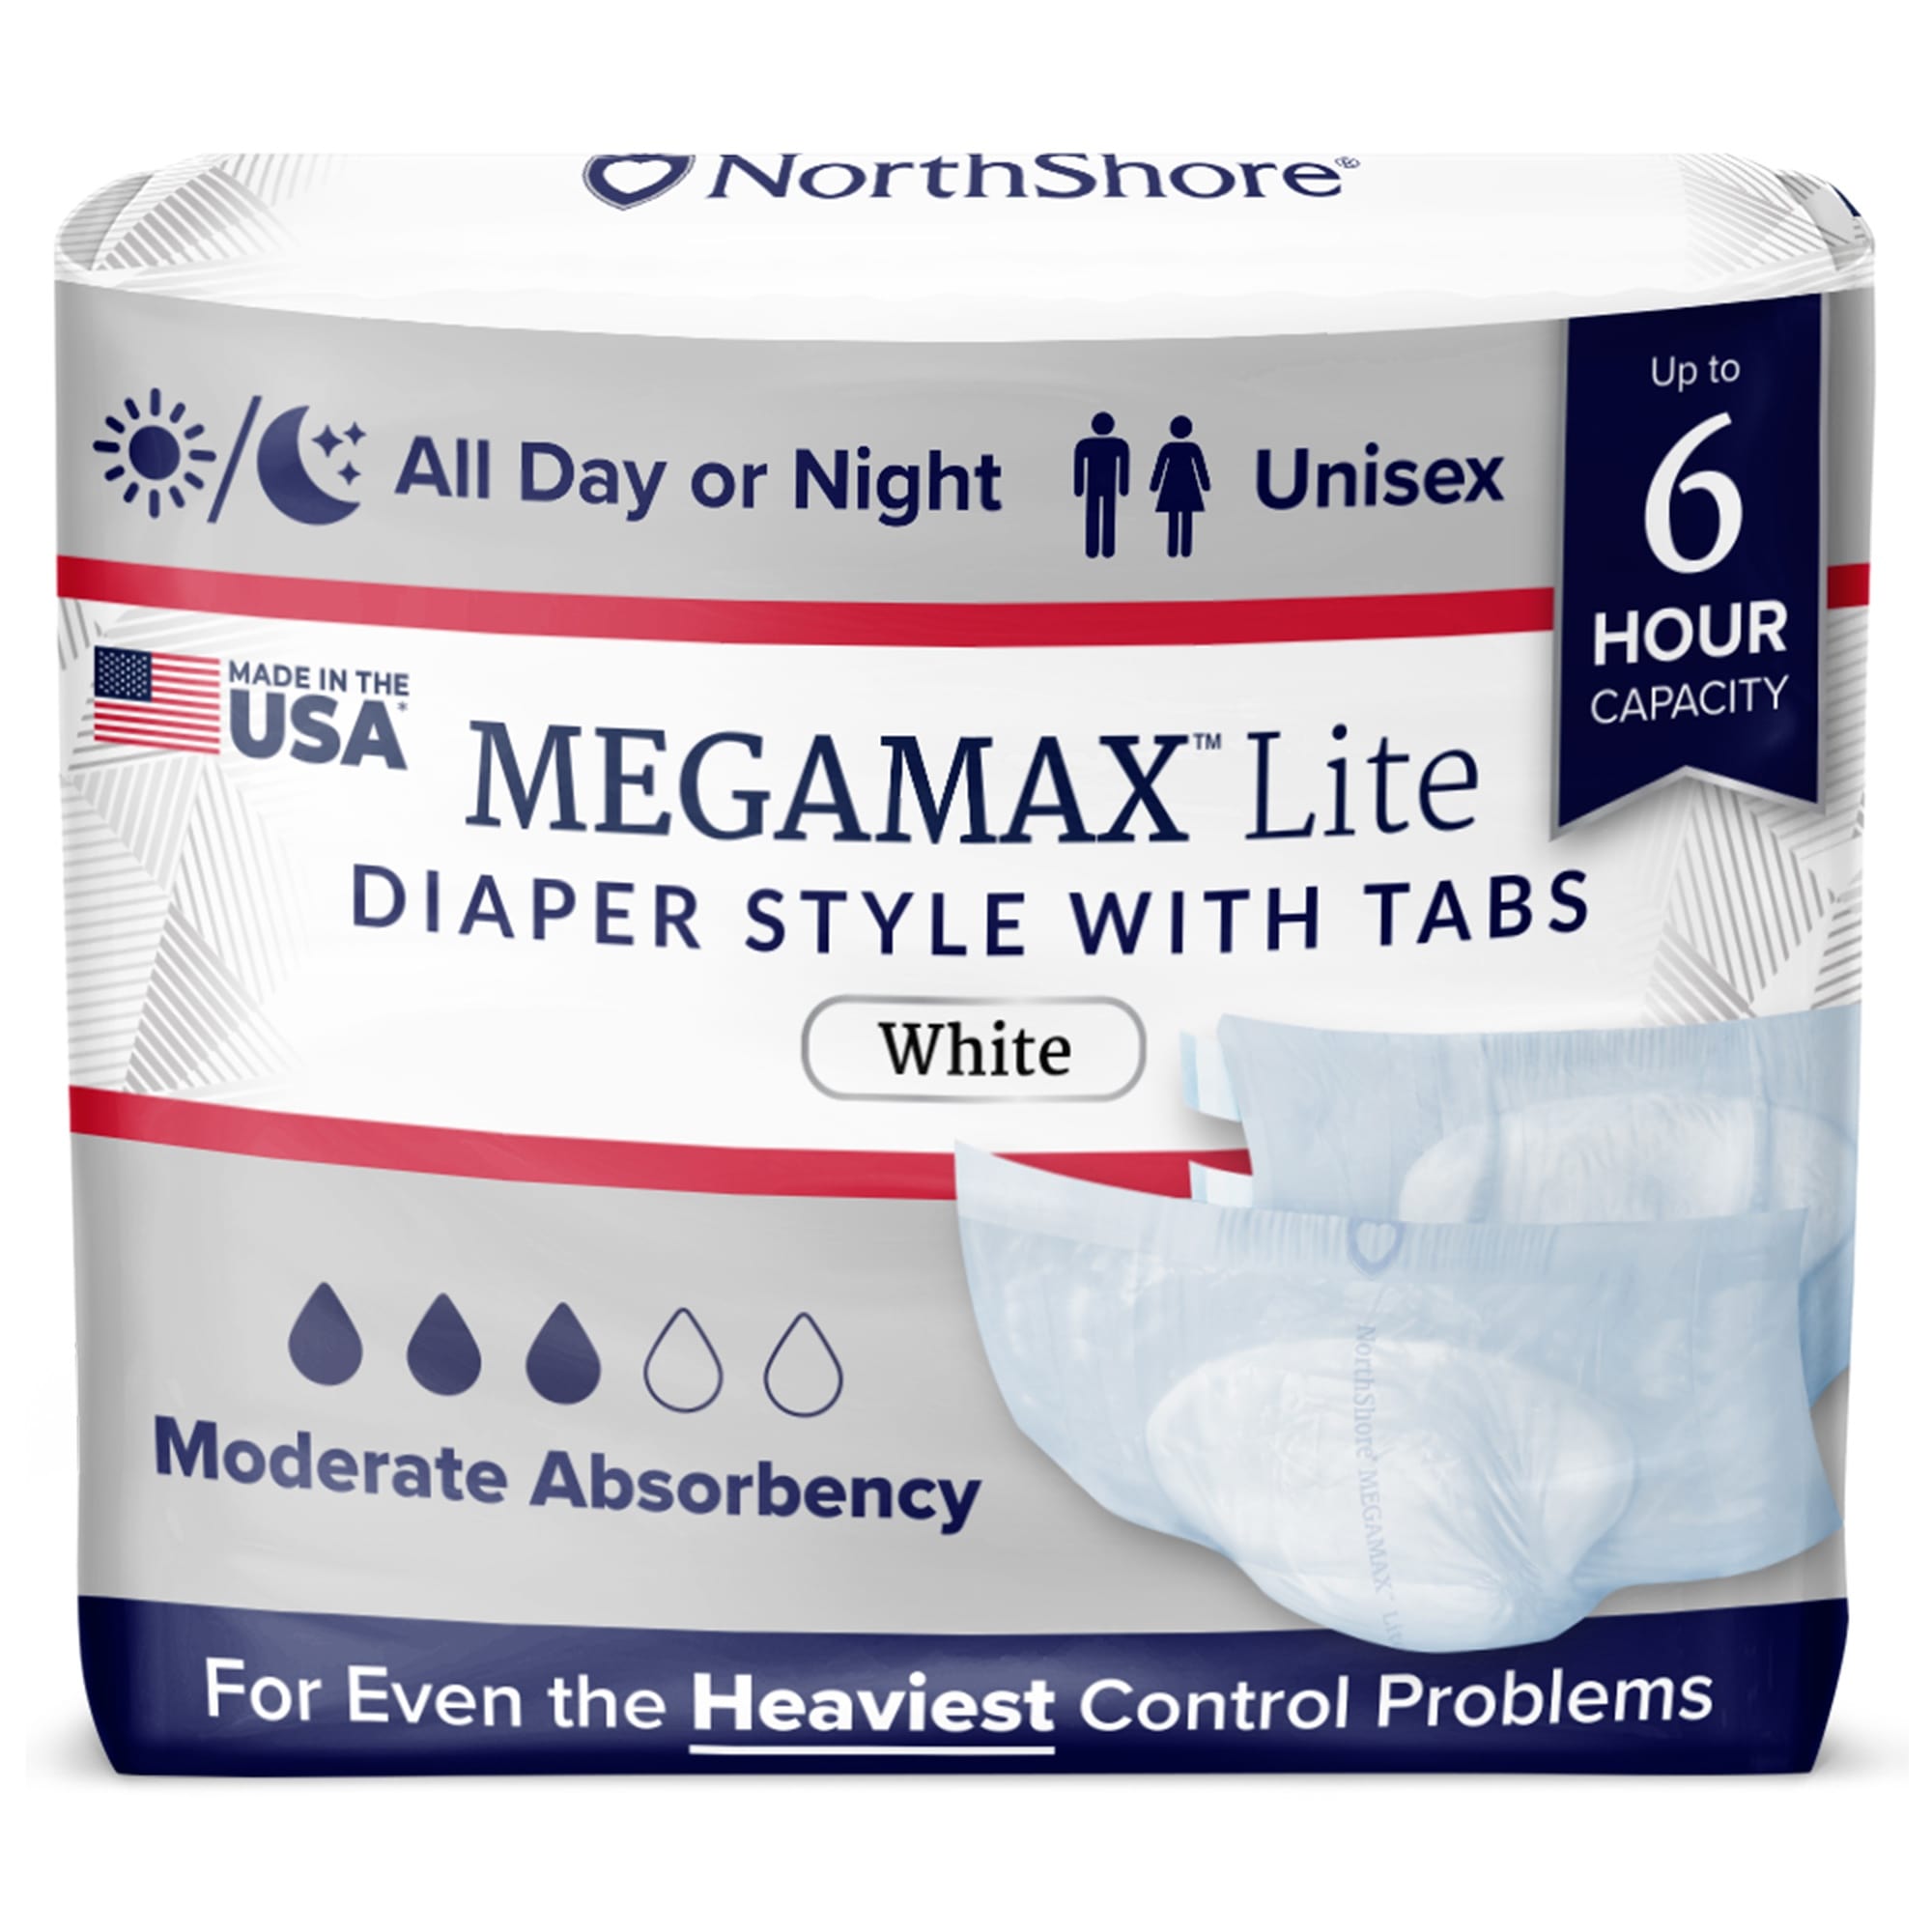 MEGAMAX diapers for total fecal incontinence